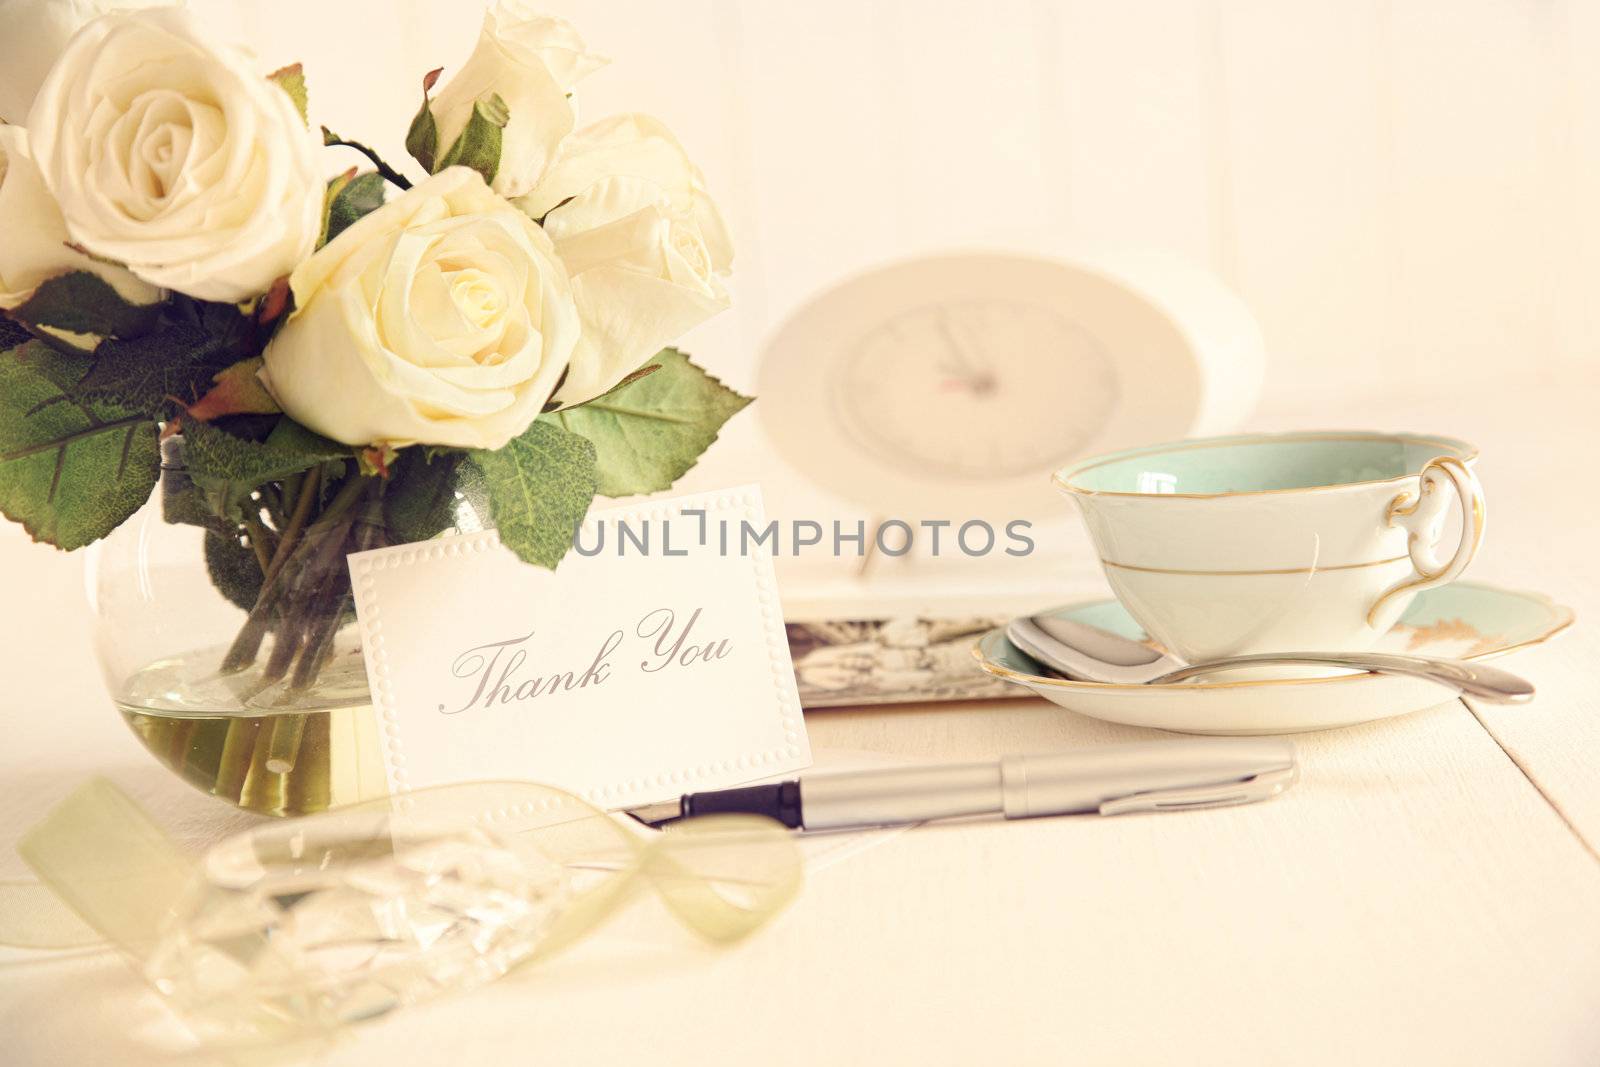 Thank you note on table with nostalgic romantic feel